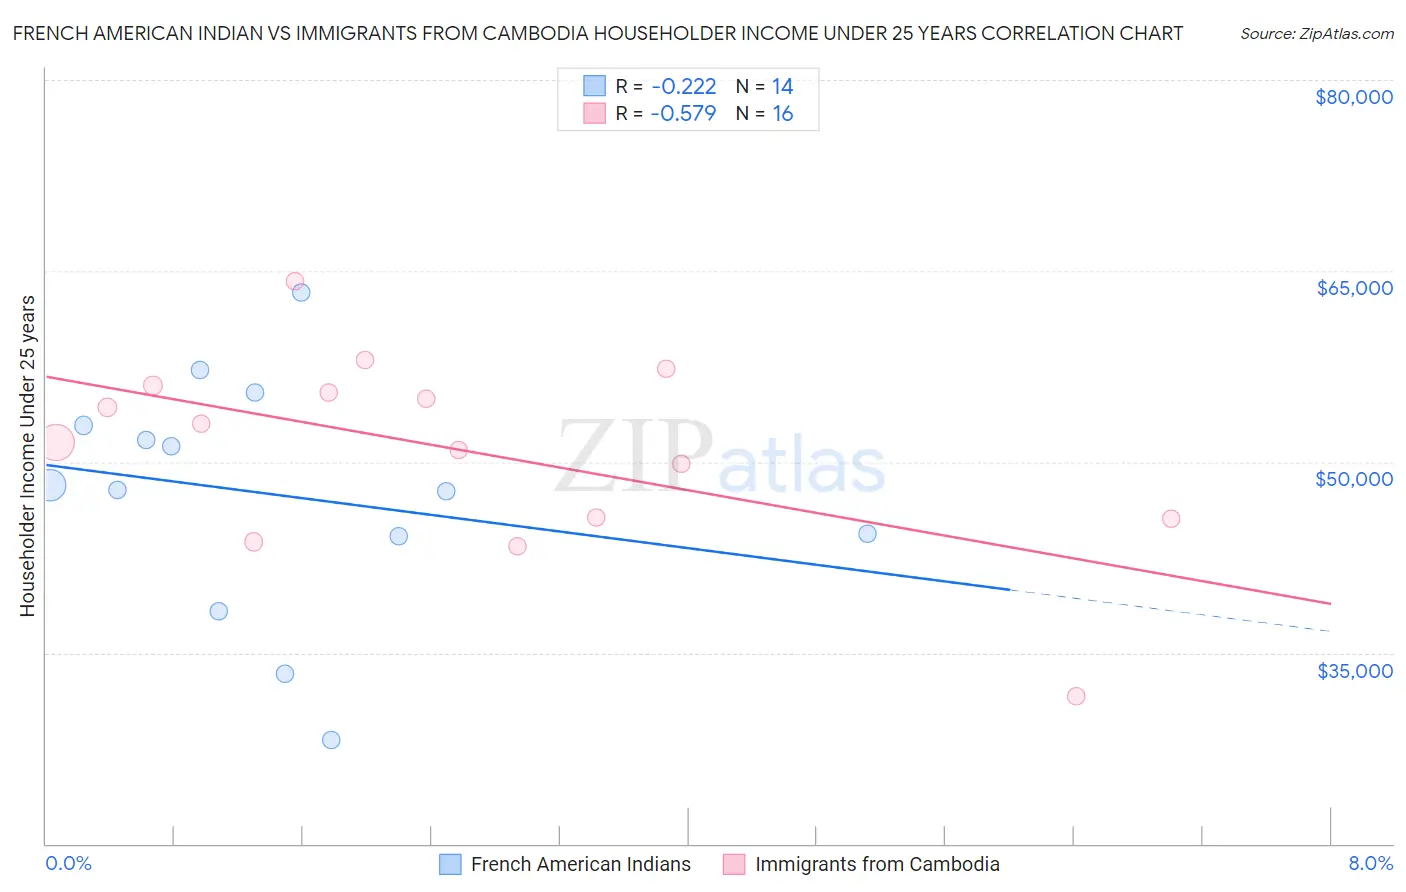 French American Indian vs Immigrants from Cambodia Householder Income Under 25 years